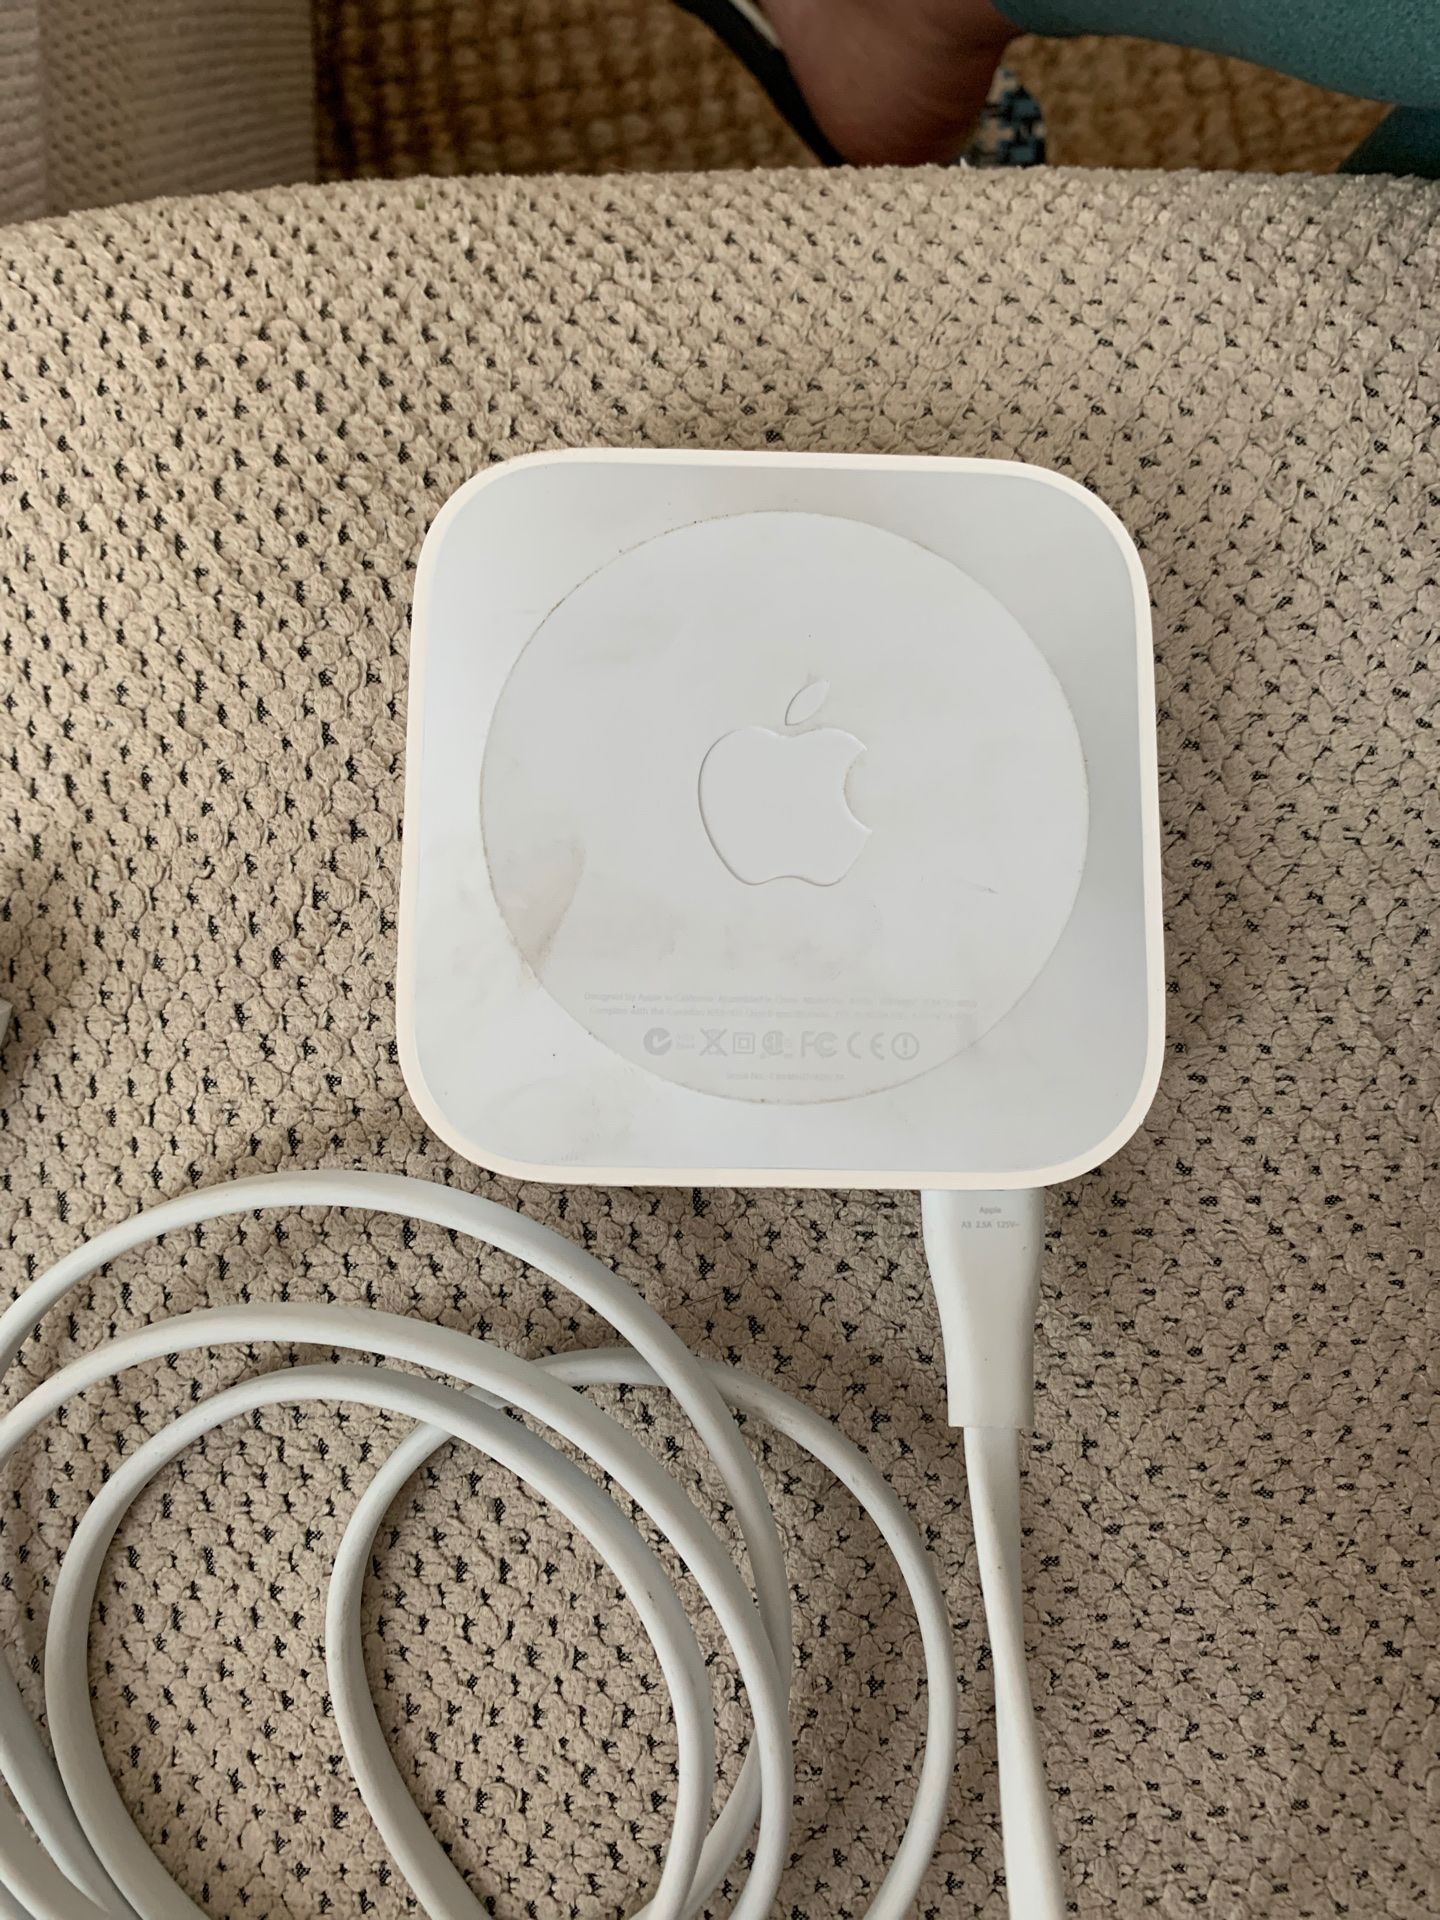 Apple Airport Express A1392 Dual-Band Wi-Fi Router